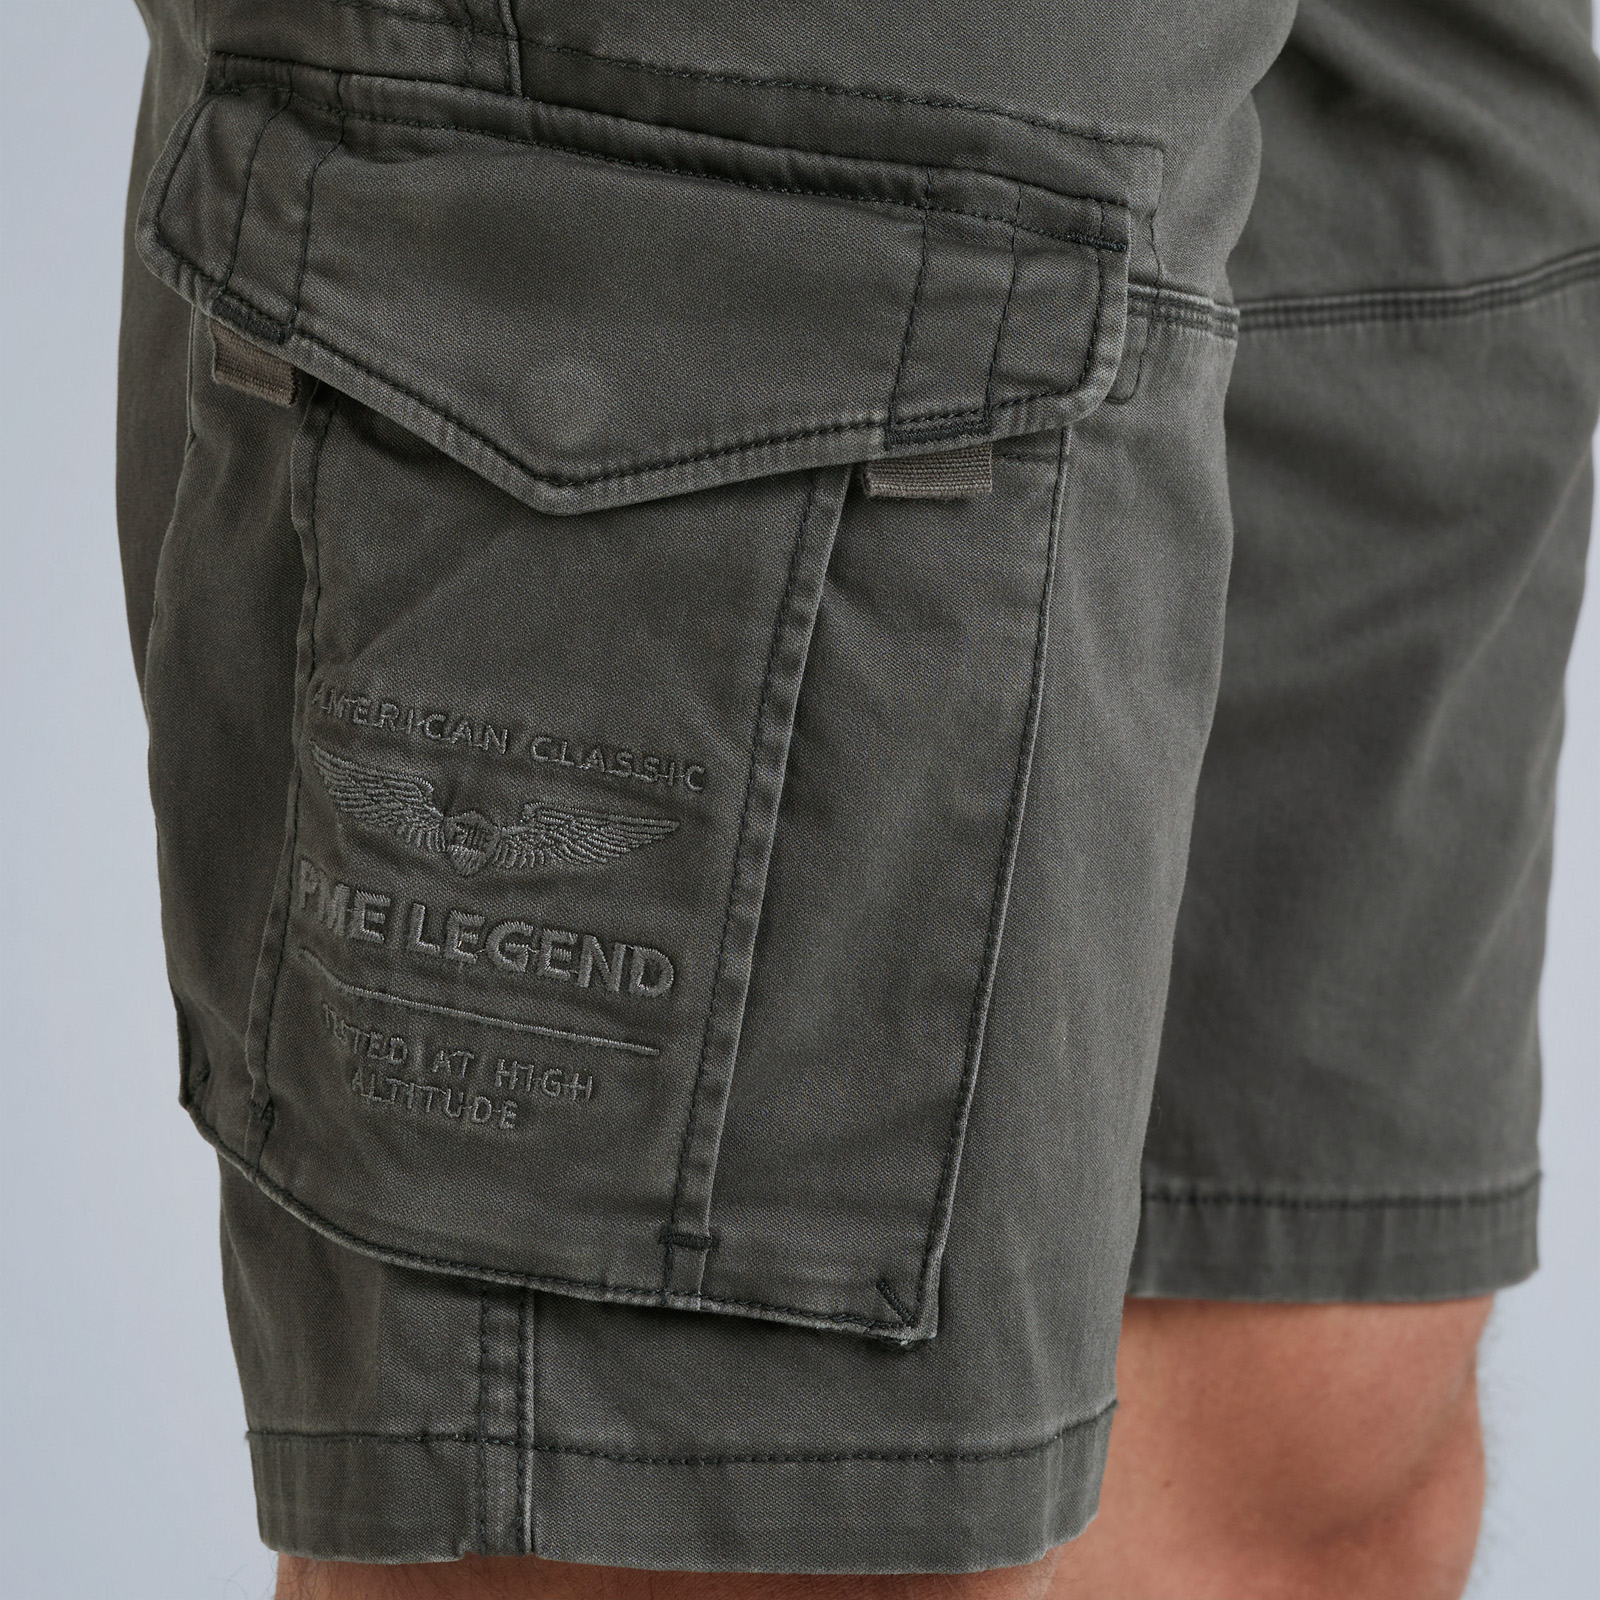 Short and shipping | Stretch Free LEGEND returns PME | Cargo Twill